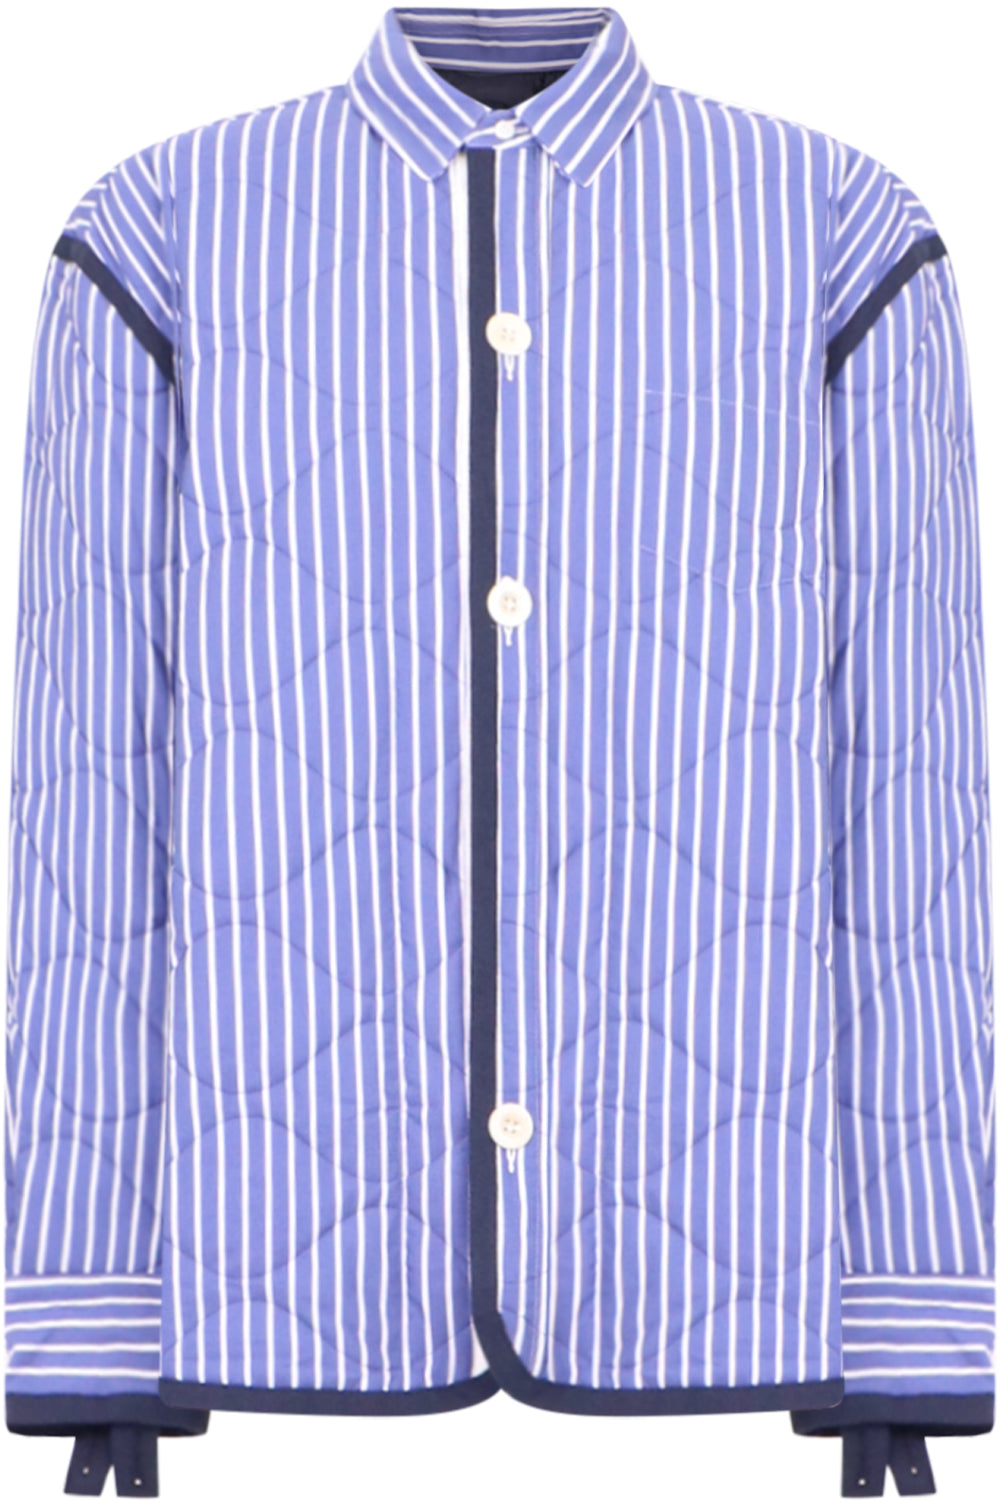 SACAI RTW WEATHER QUILTED SHIRT | BLUE STRIPE